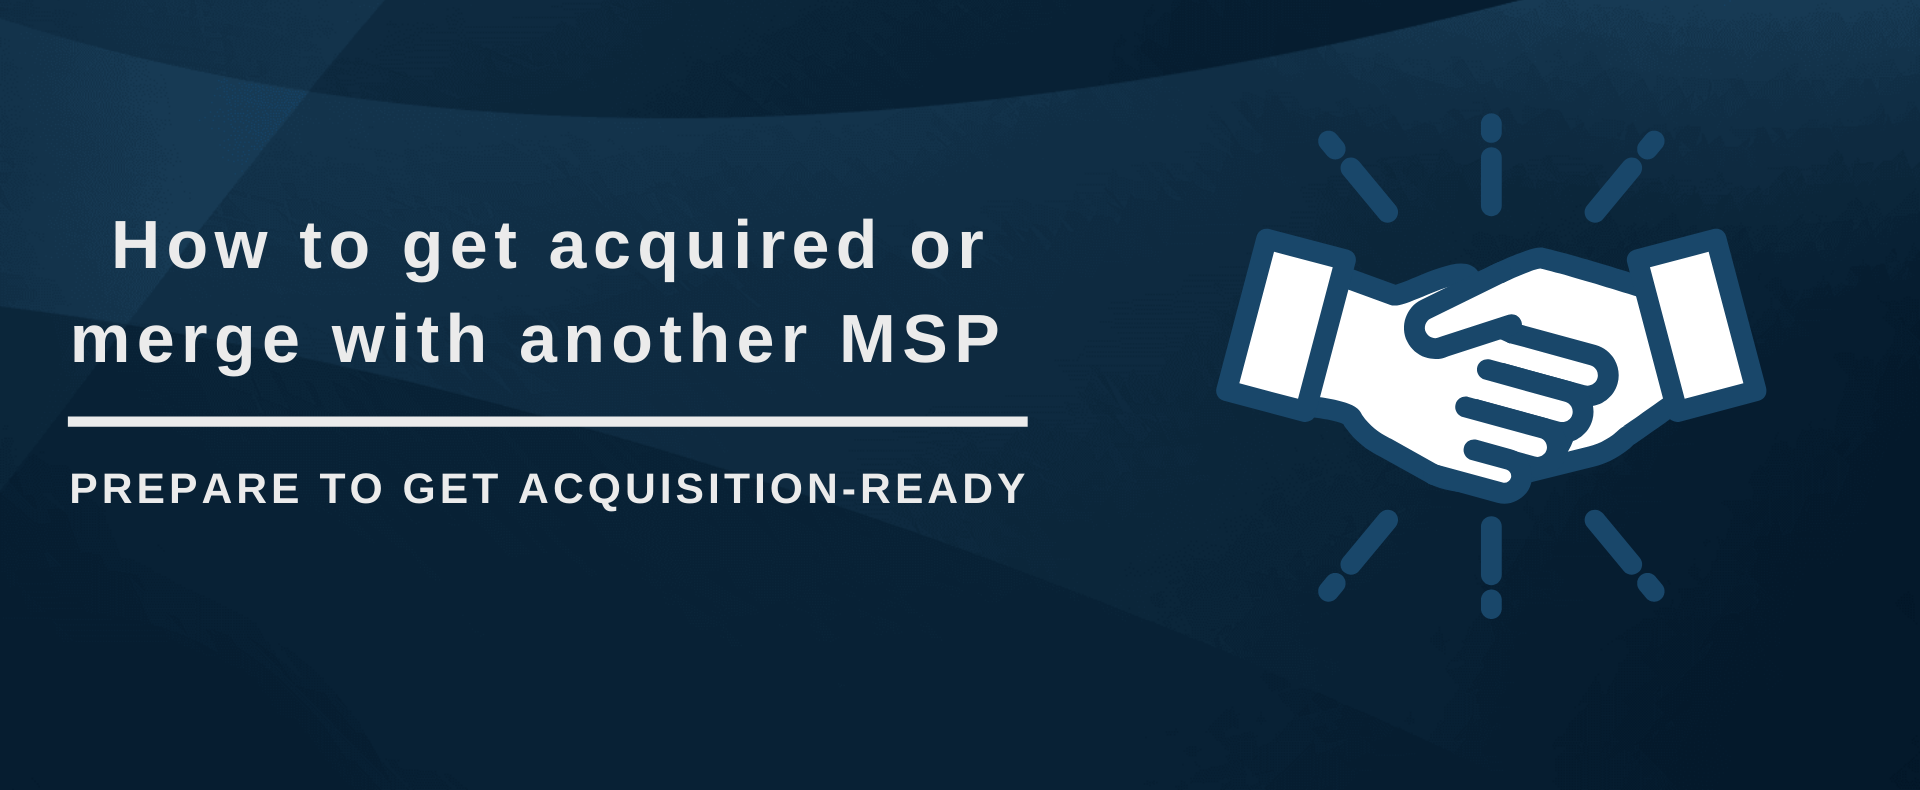 How to get acquired or merge with another MSP